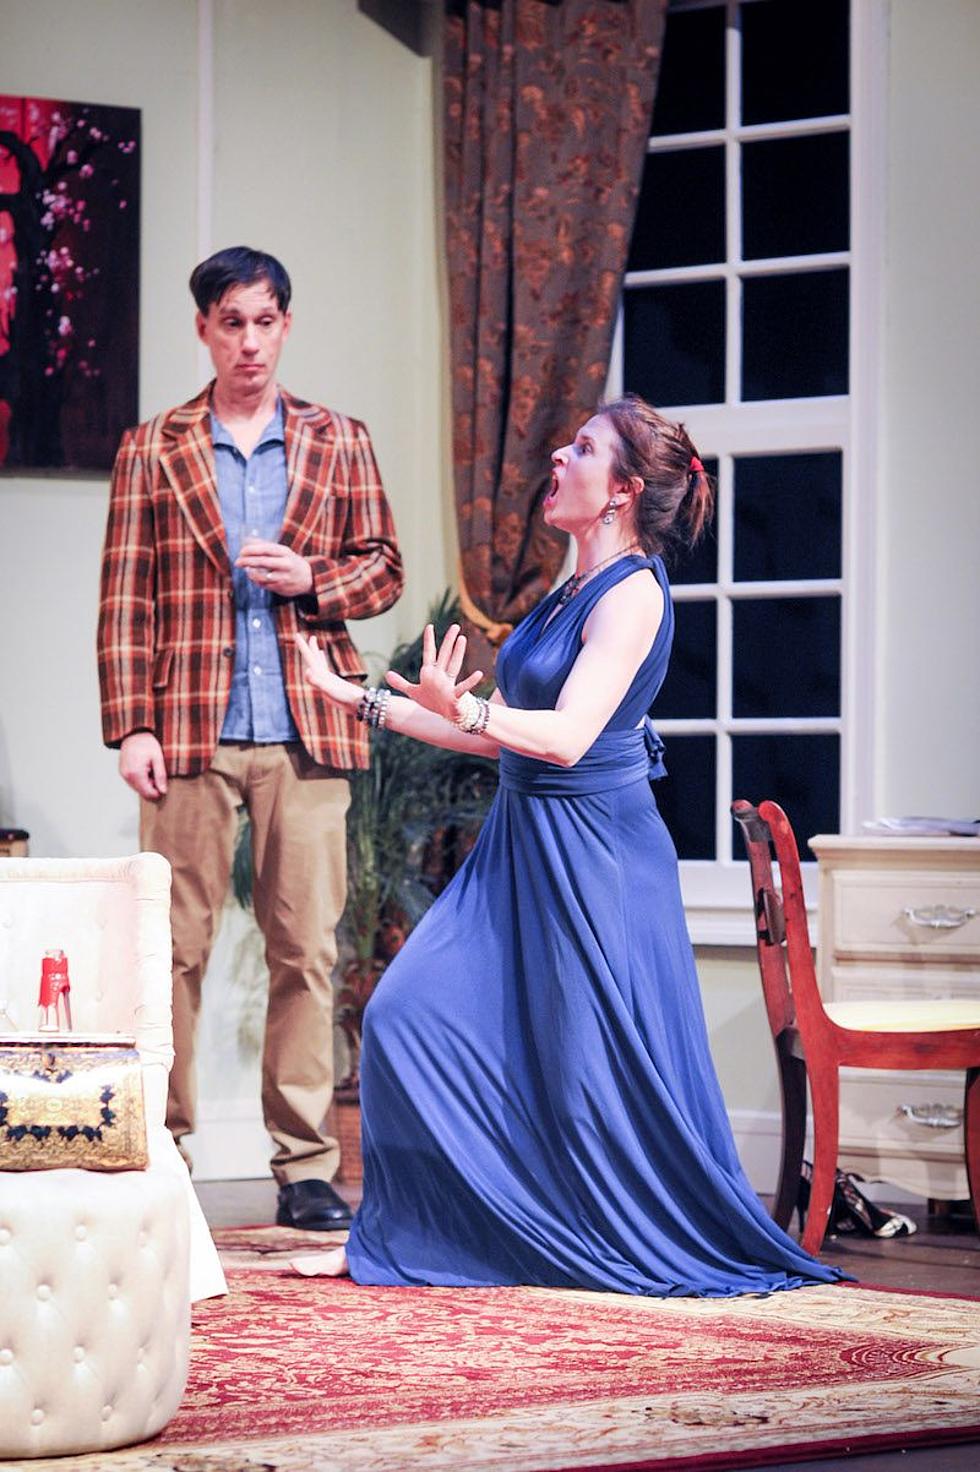 Theater review: Reviews are the thing in McNally comedy